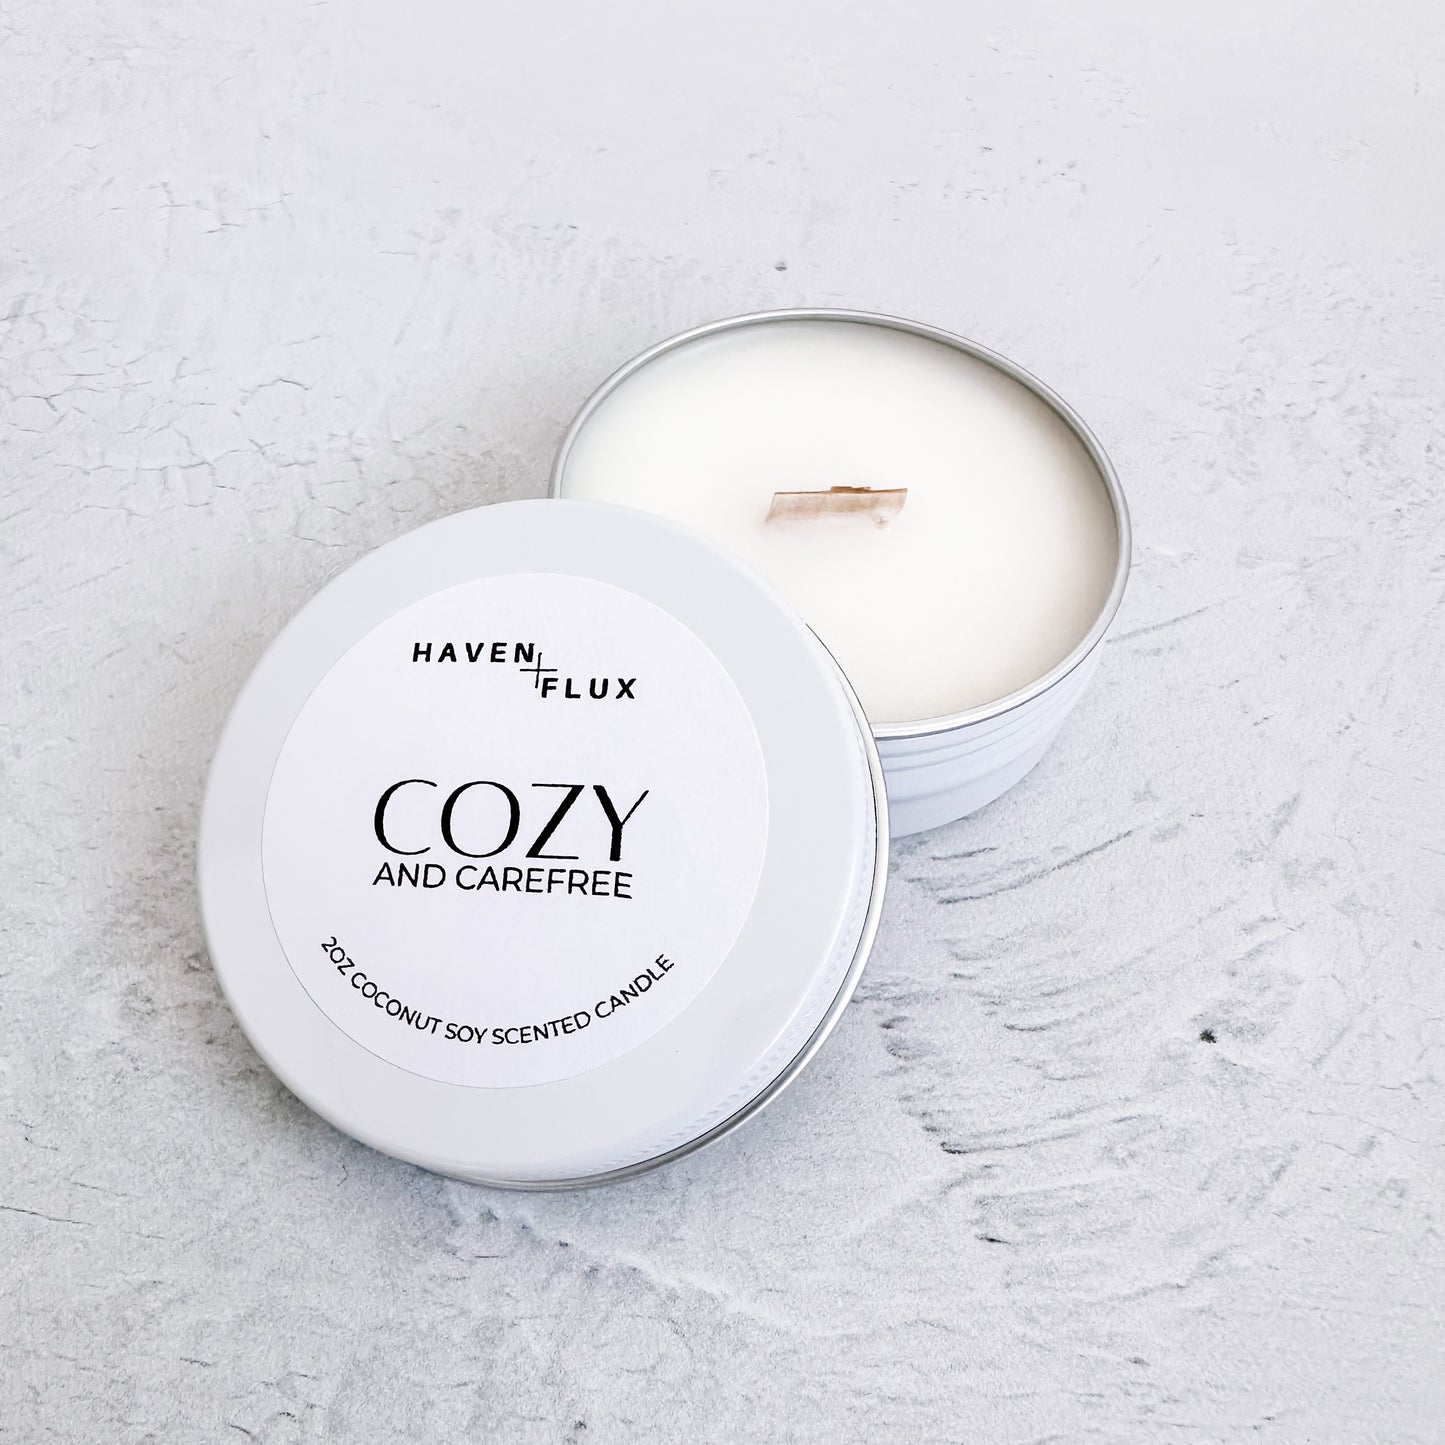 Non-Toxic Coconut Soy Wax Wooden Wick Cozy and Carefree 2oz Intention Sample Candle for Mental Health